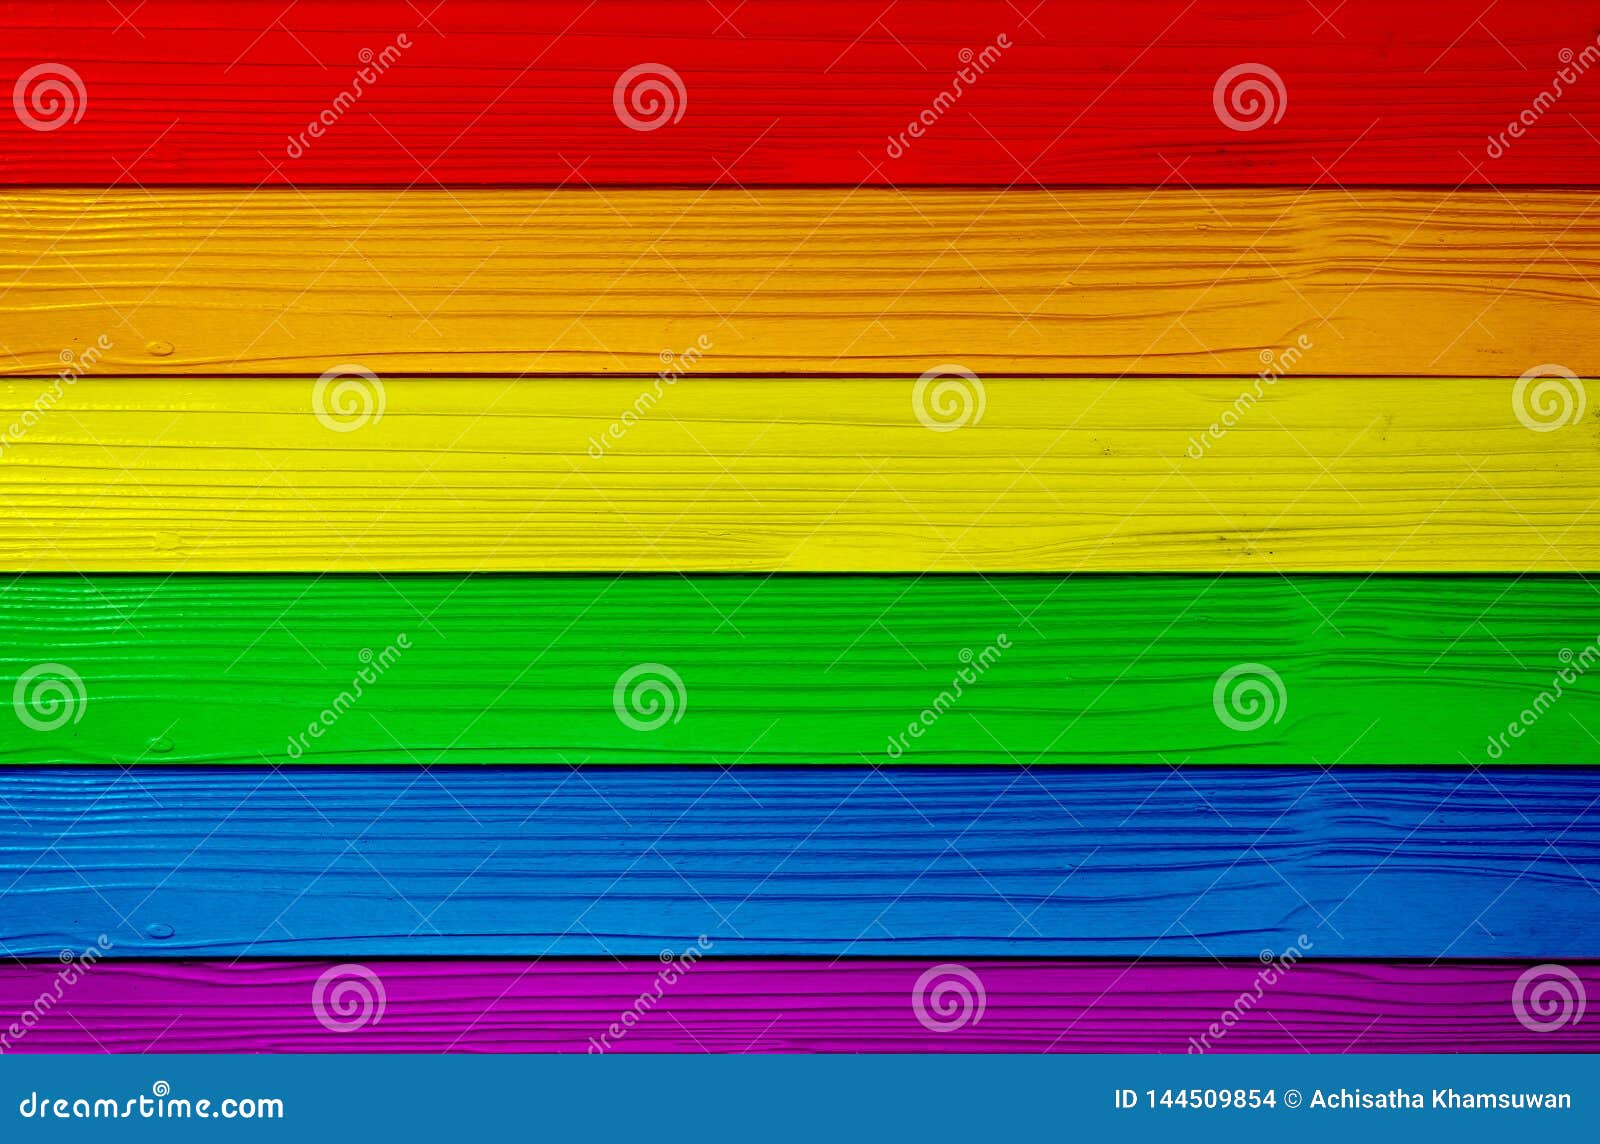 Symbol Color Of Lgbtq On Wooden Wall Background Red Orange Yellow Green Blue Purple Stock Illustration Illustration Of Bisexual Hardwood